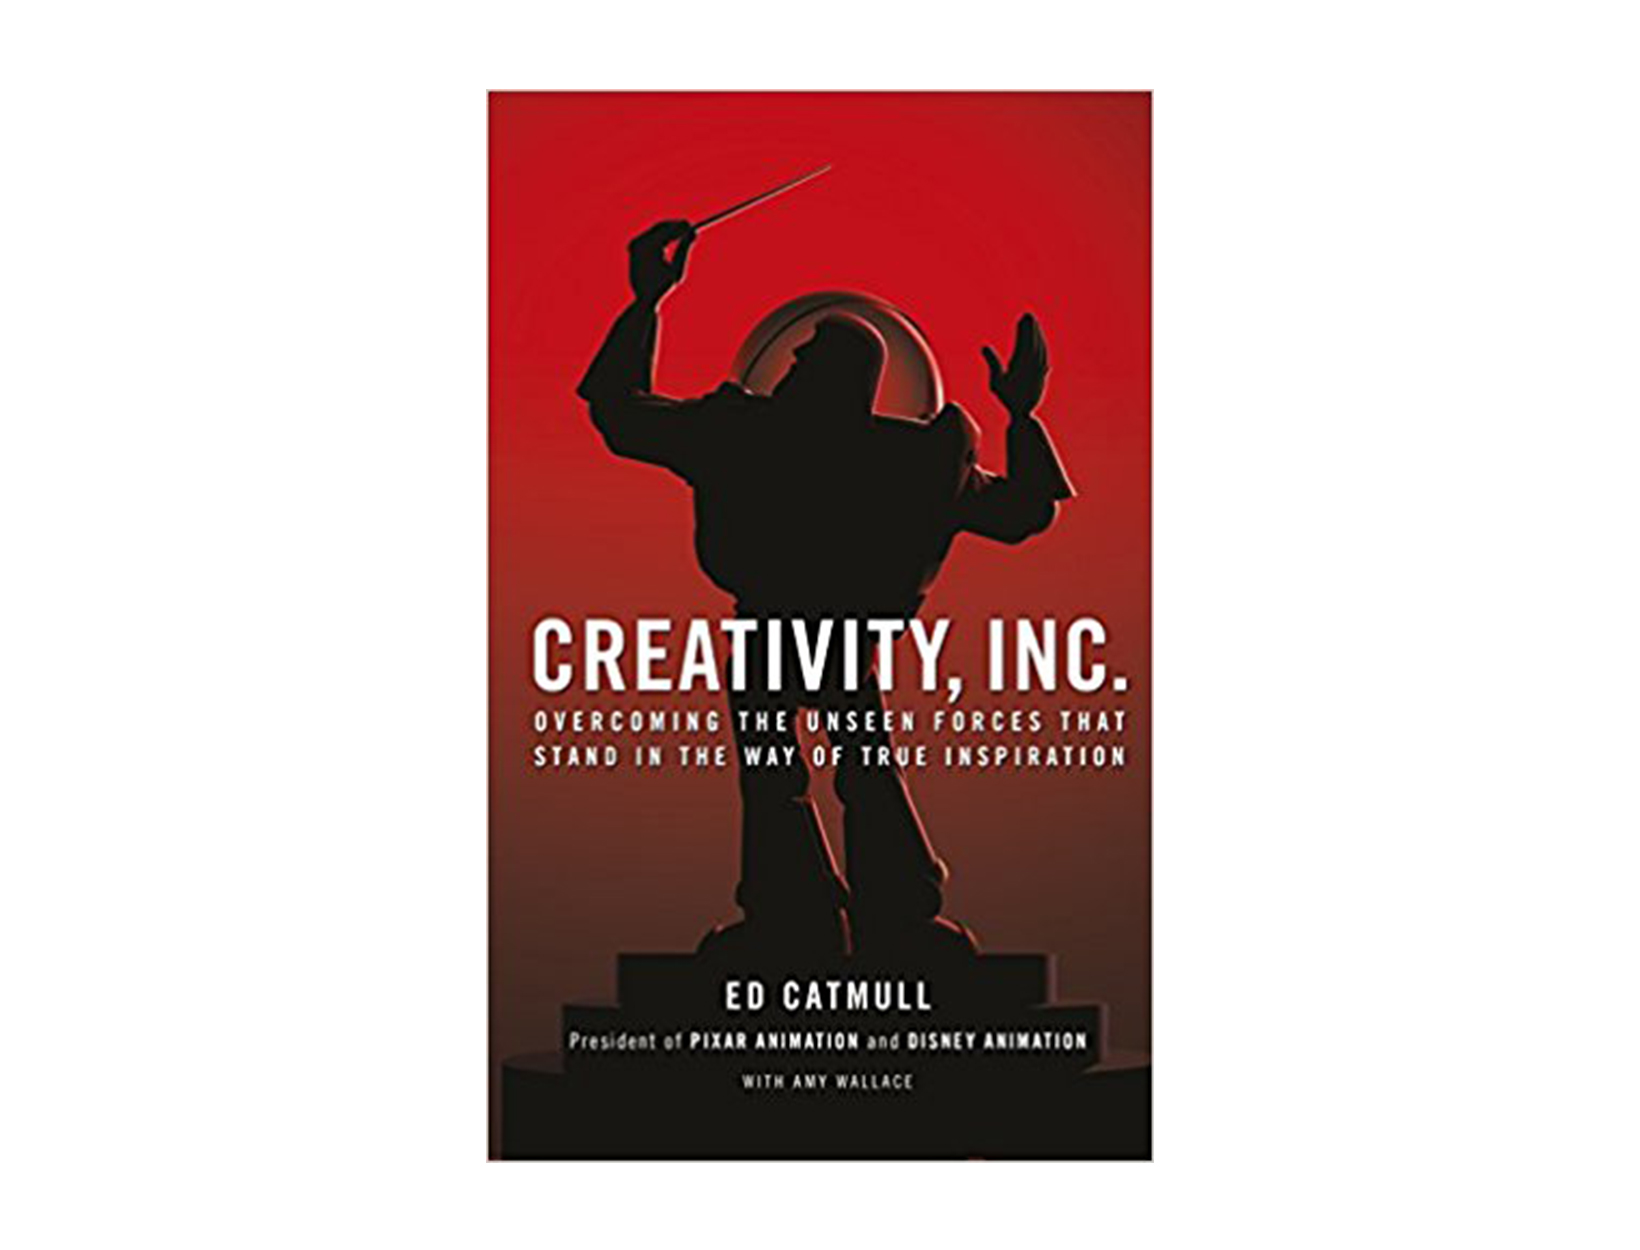 Creativity, Inc.: Overcoming the Unseen Forces That Stand in the Way of True Inspiration by Ed Catmull with Amy Wallace